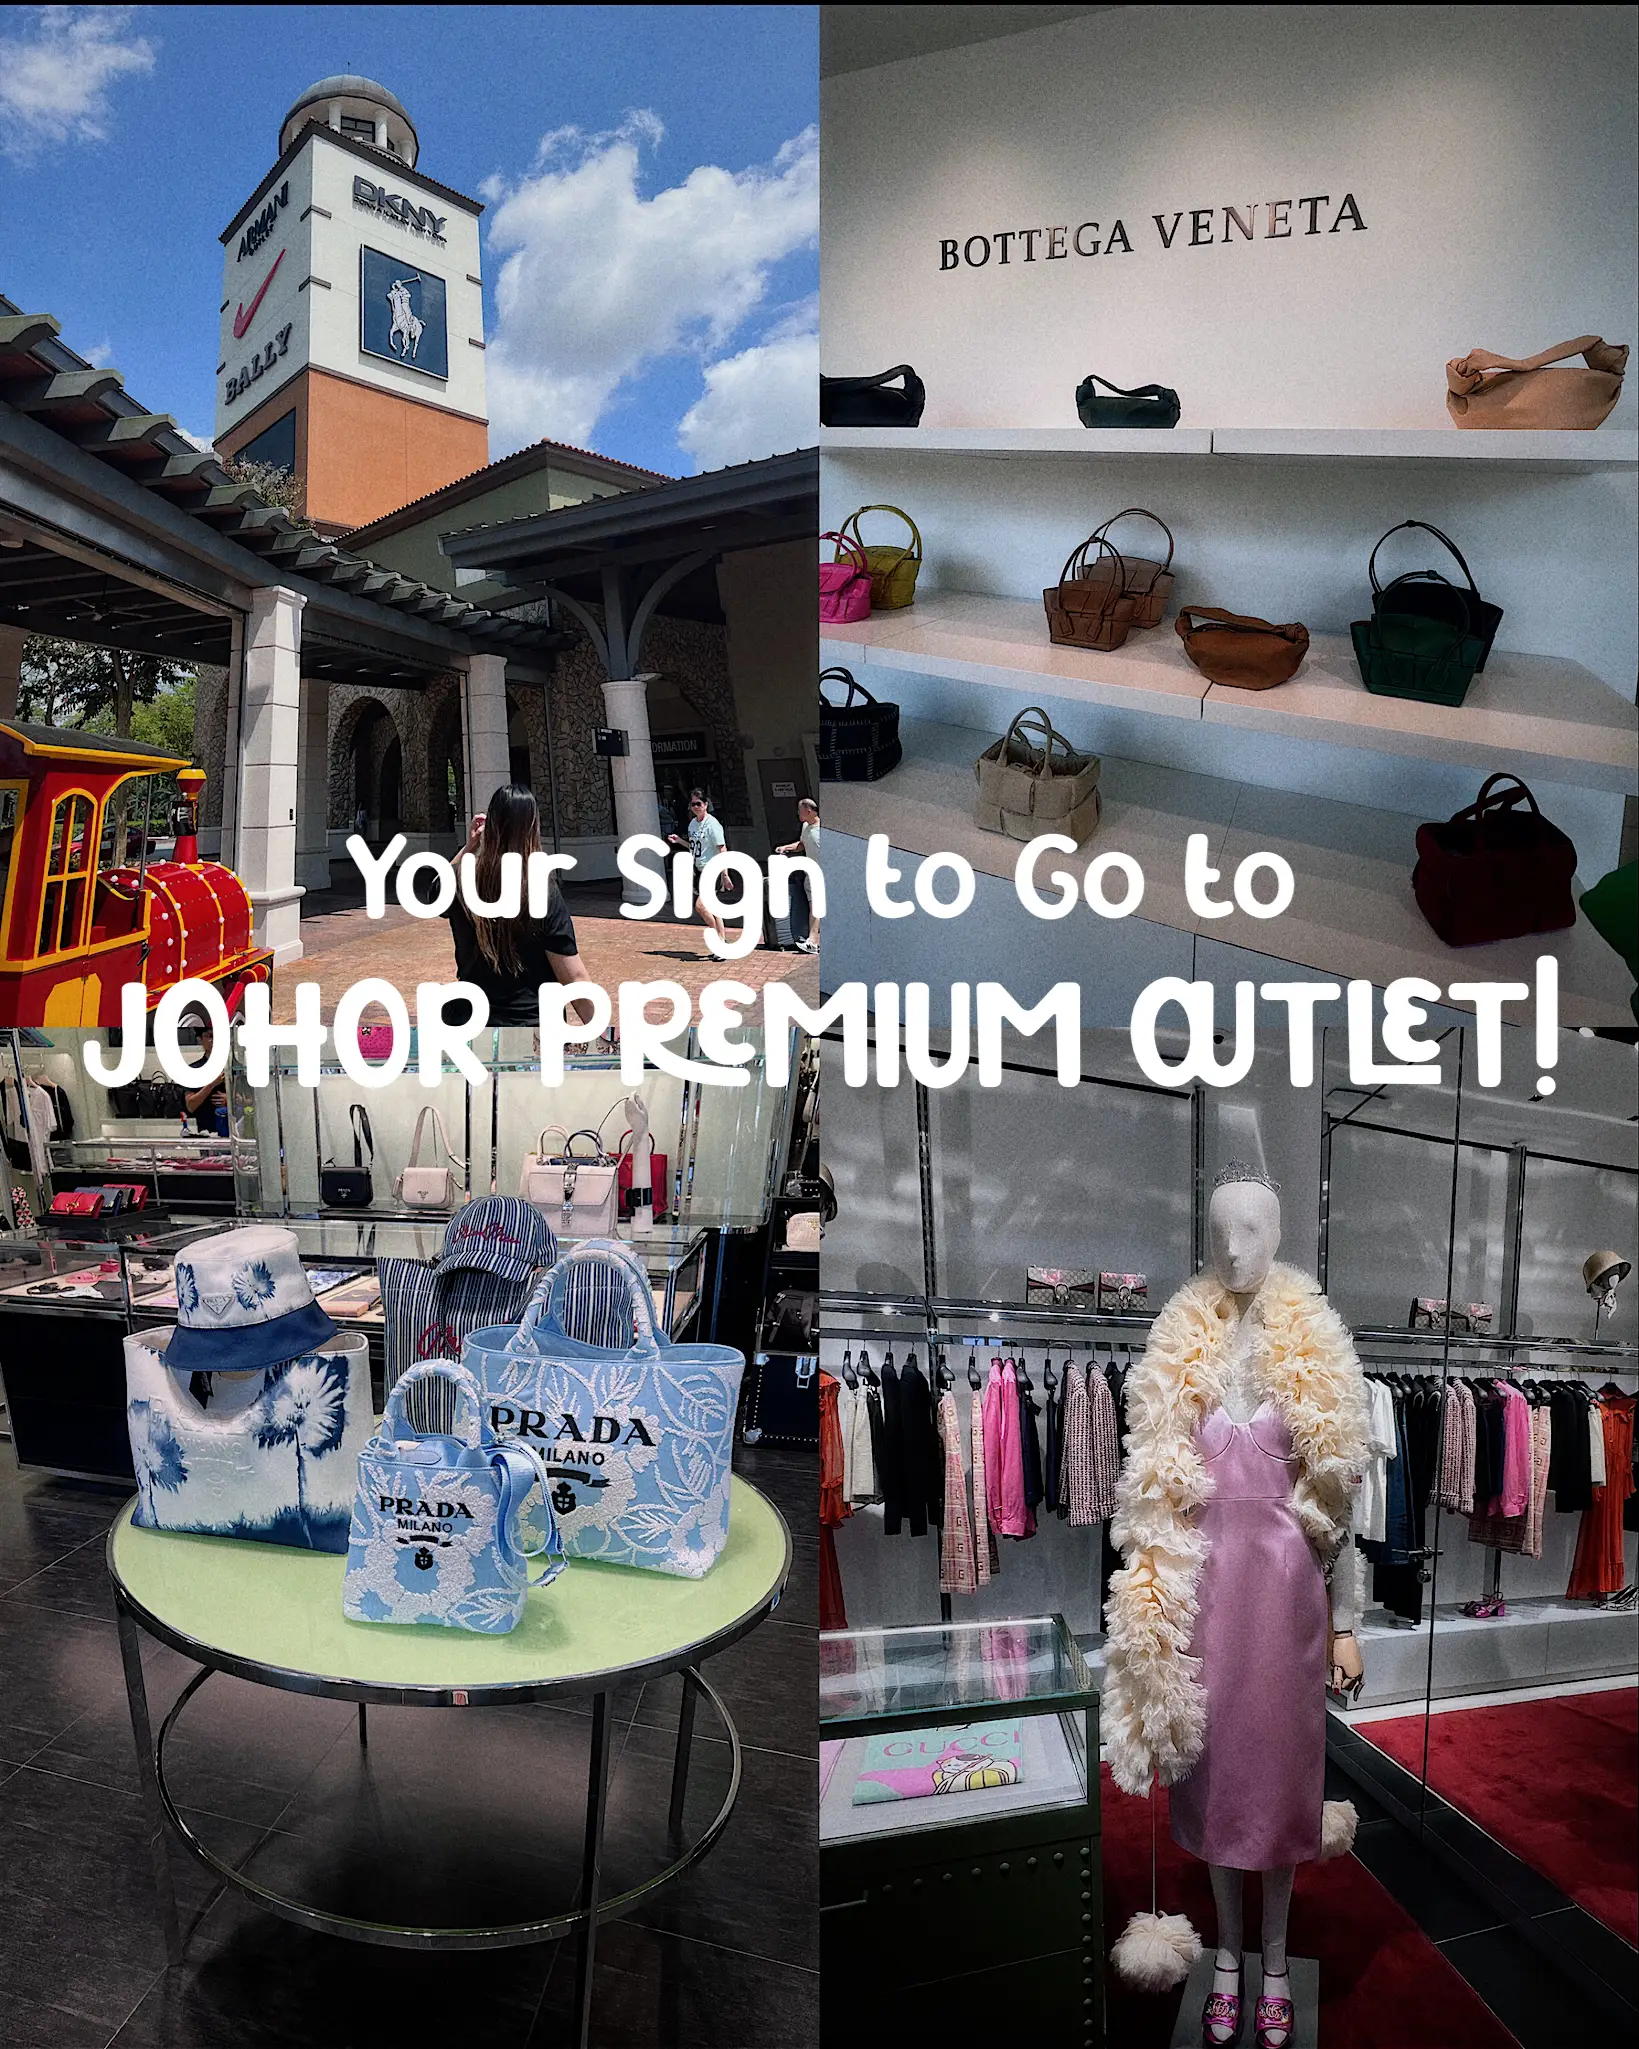 This is your sign to go Johor Premium Outlet! 💯✨👍🏻, Gallery posted by  Cassandra Ng